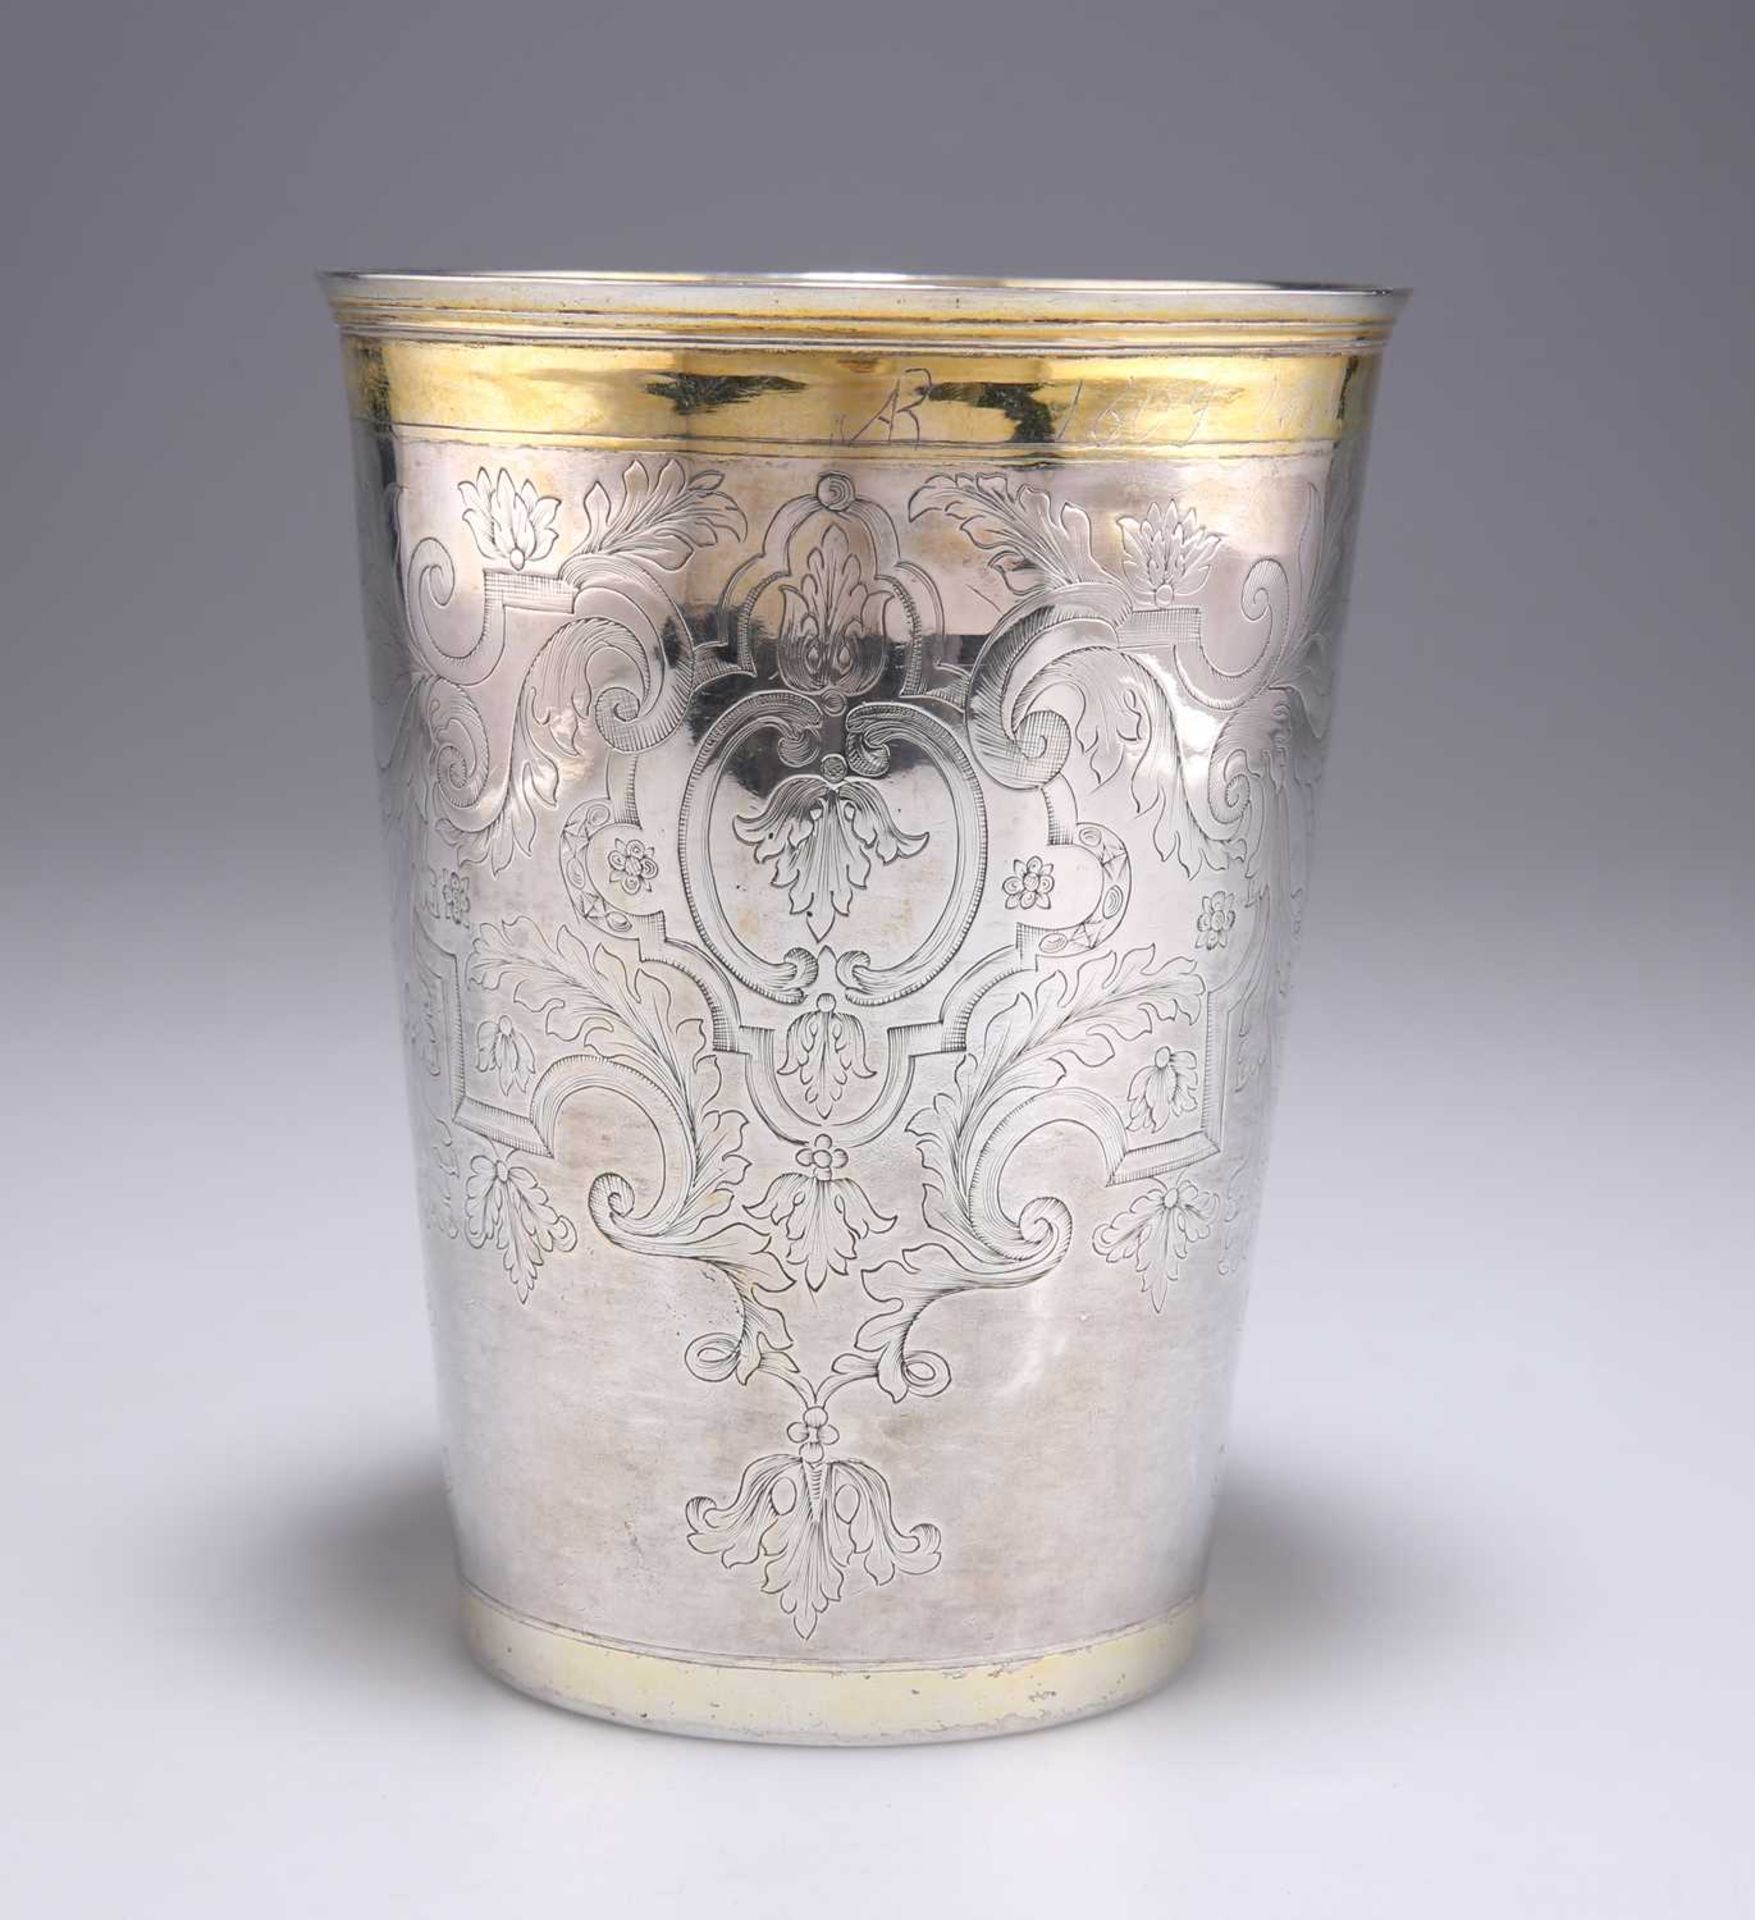 A LARGE 18TH CENTURY RUSSIAN PARCEL-GILT SILVER BEAKER - Image 2 of 6